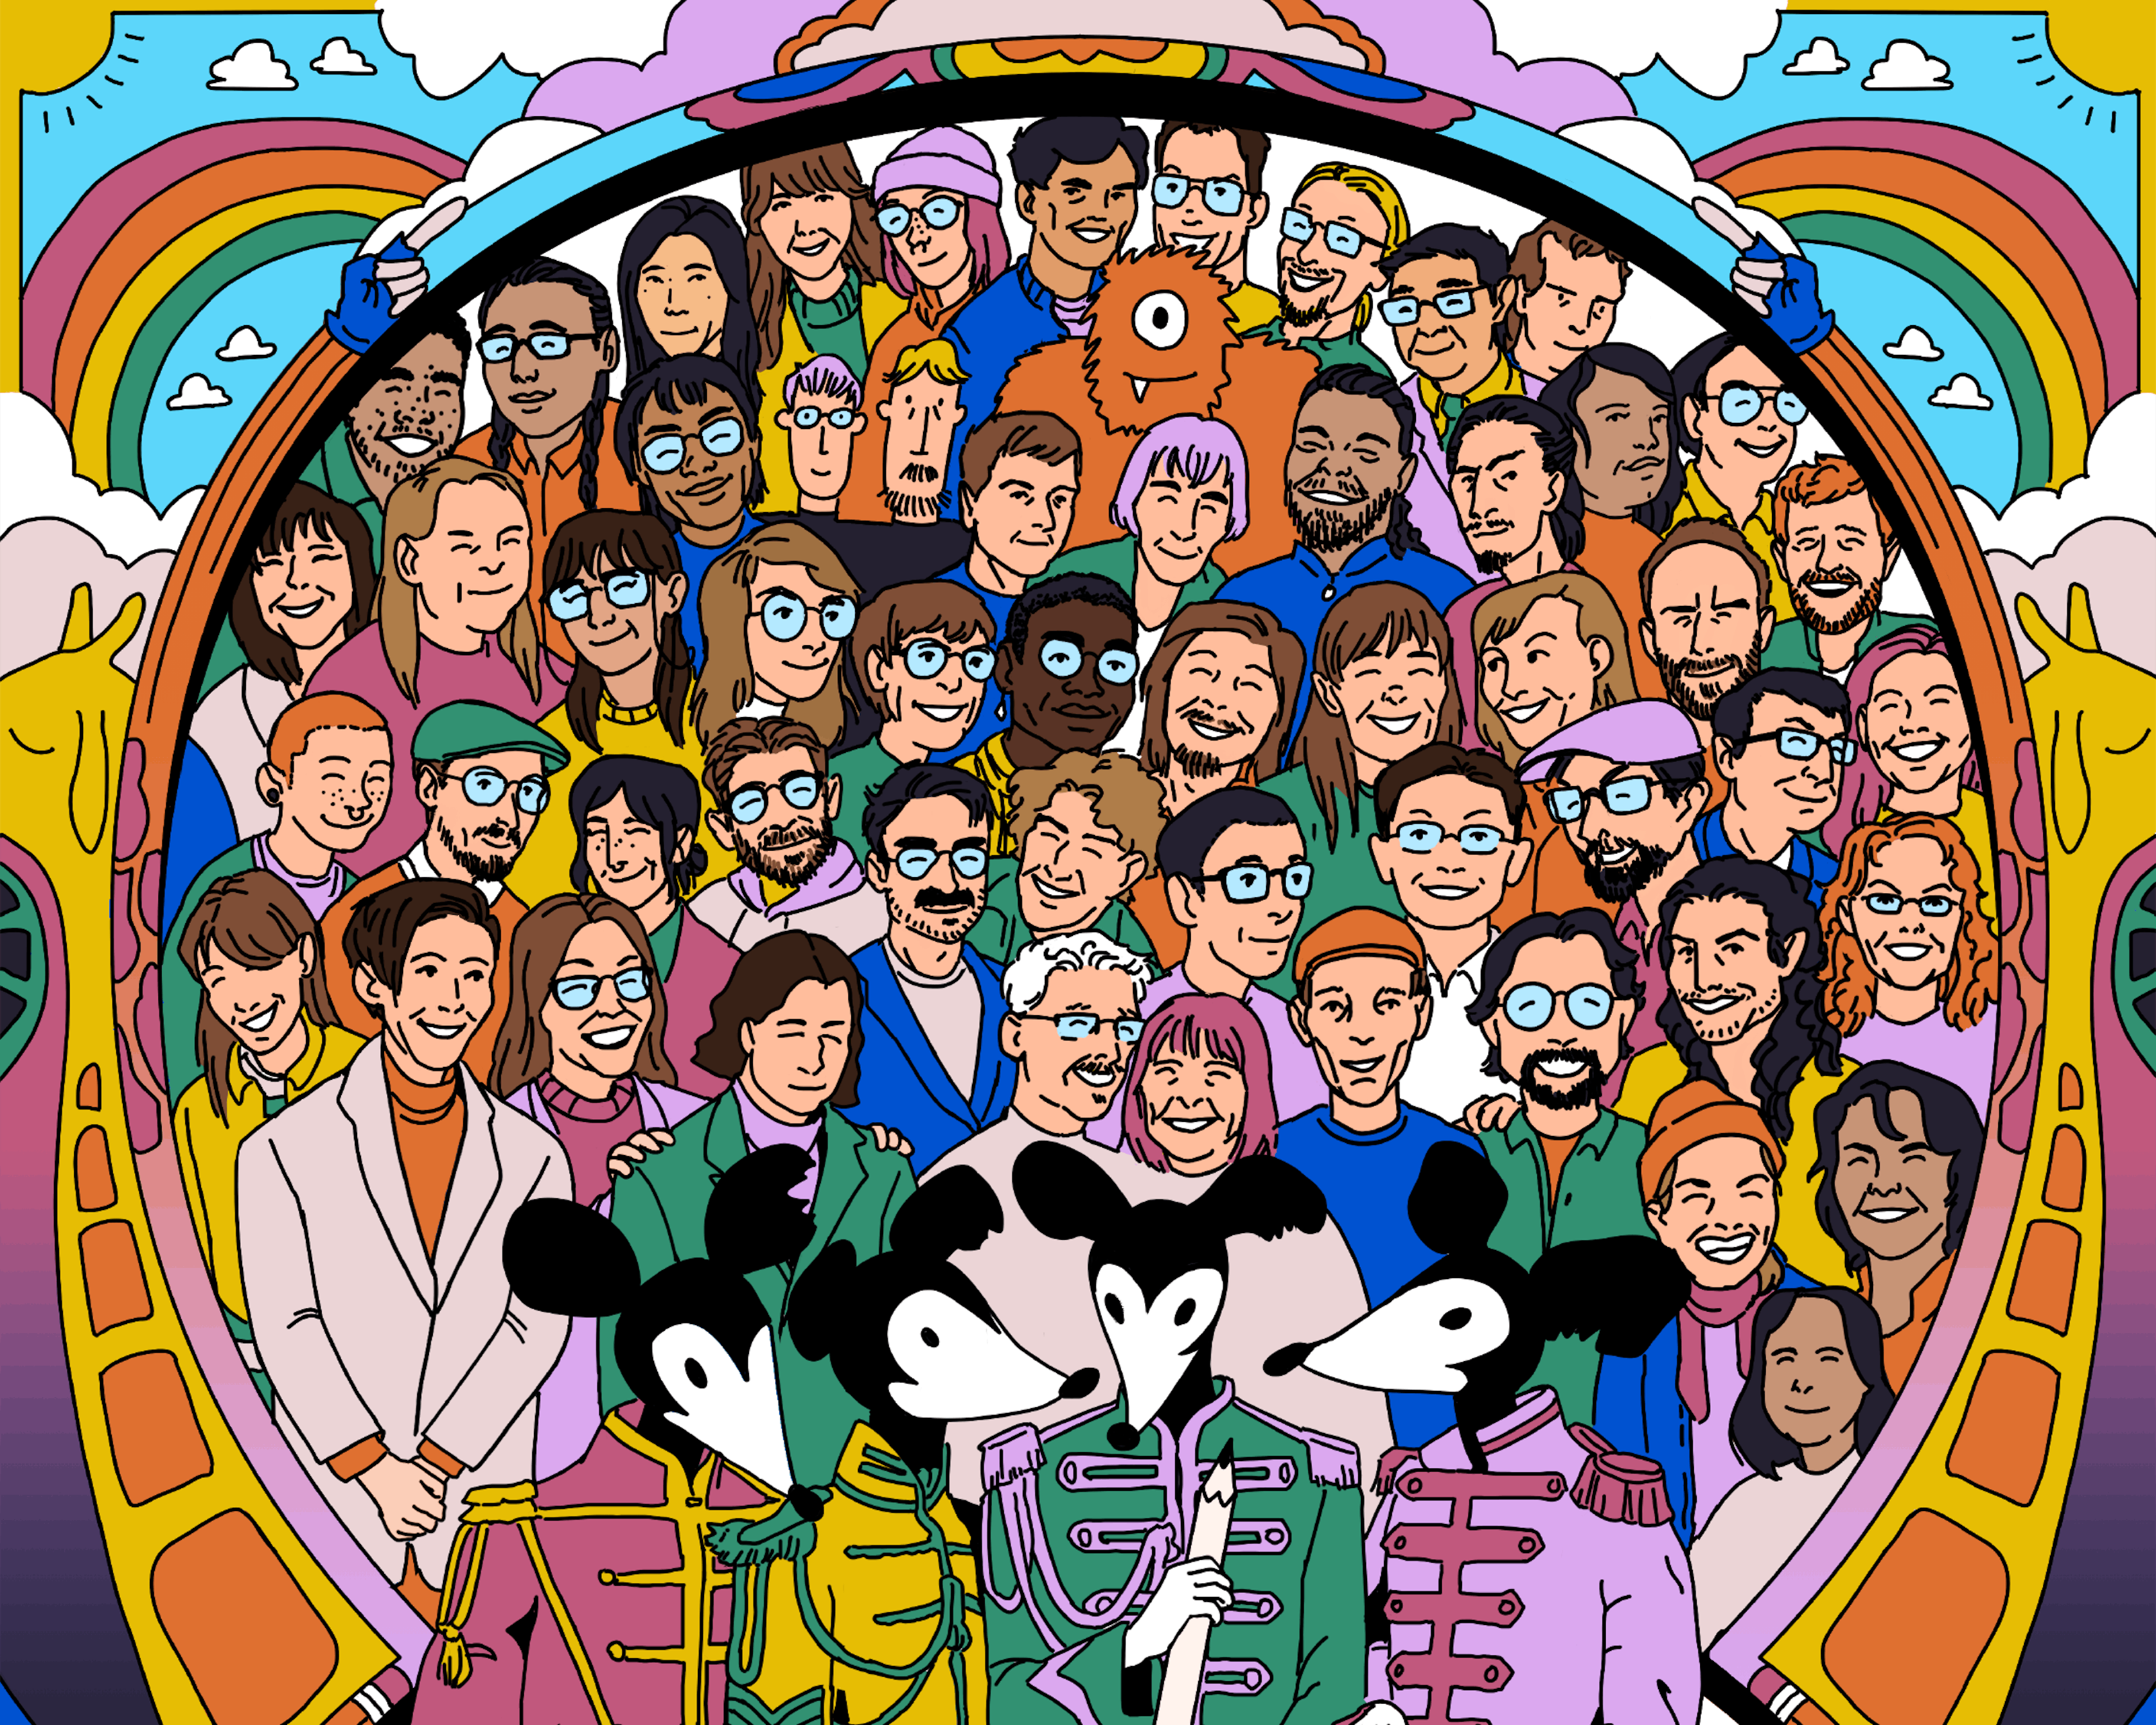 illustration of various members of the Quickdraw Animation Society - promotional poster image for the 40th anniversary reunion